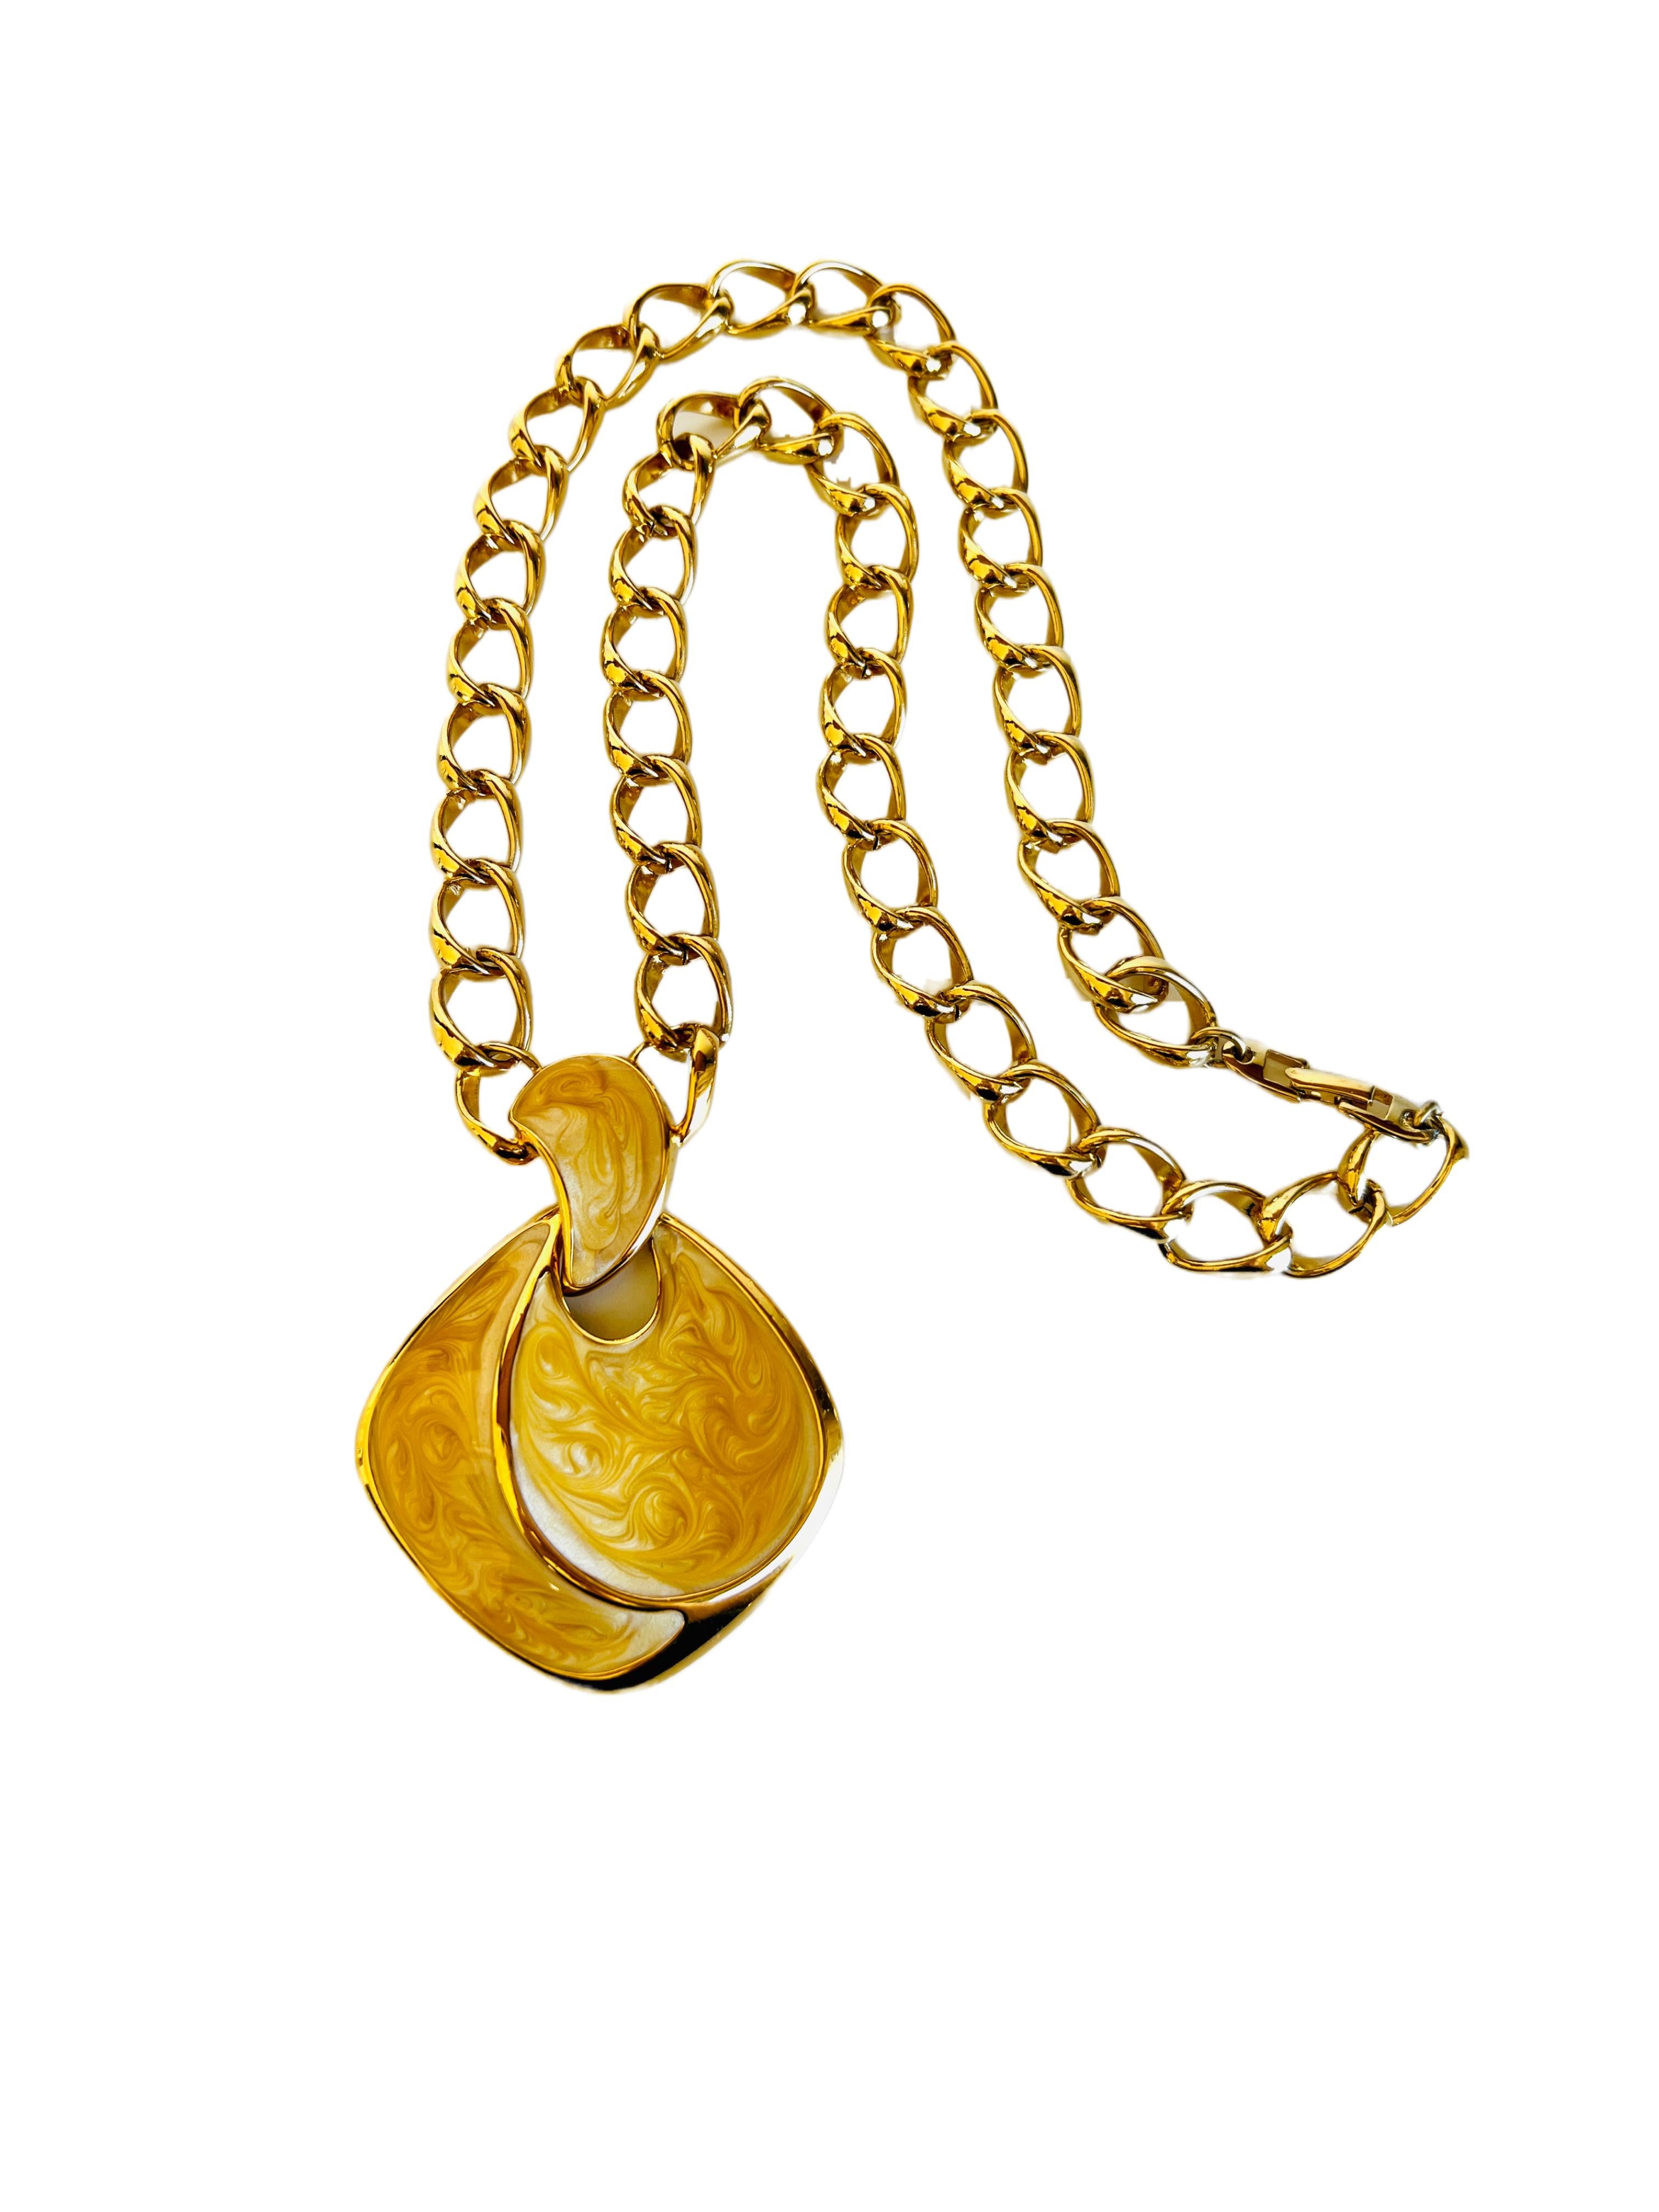 Napier Swirled Enamel Chunky Gold Chain Link Statement Necklace For Sale 4